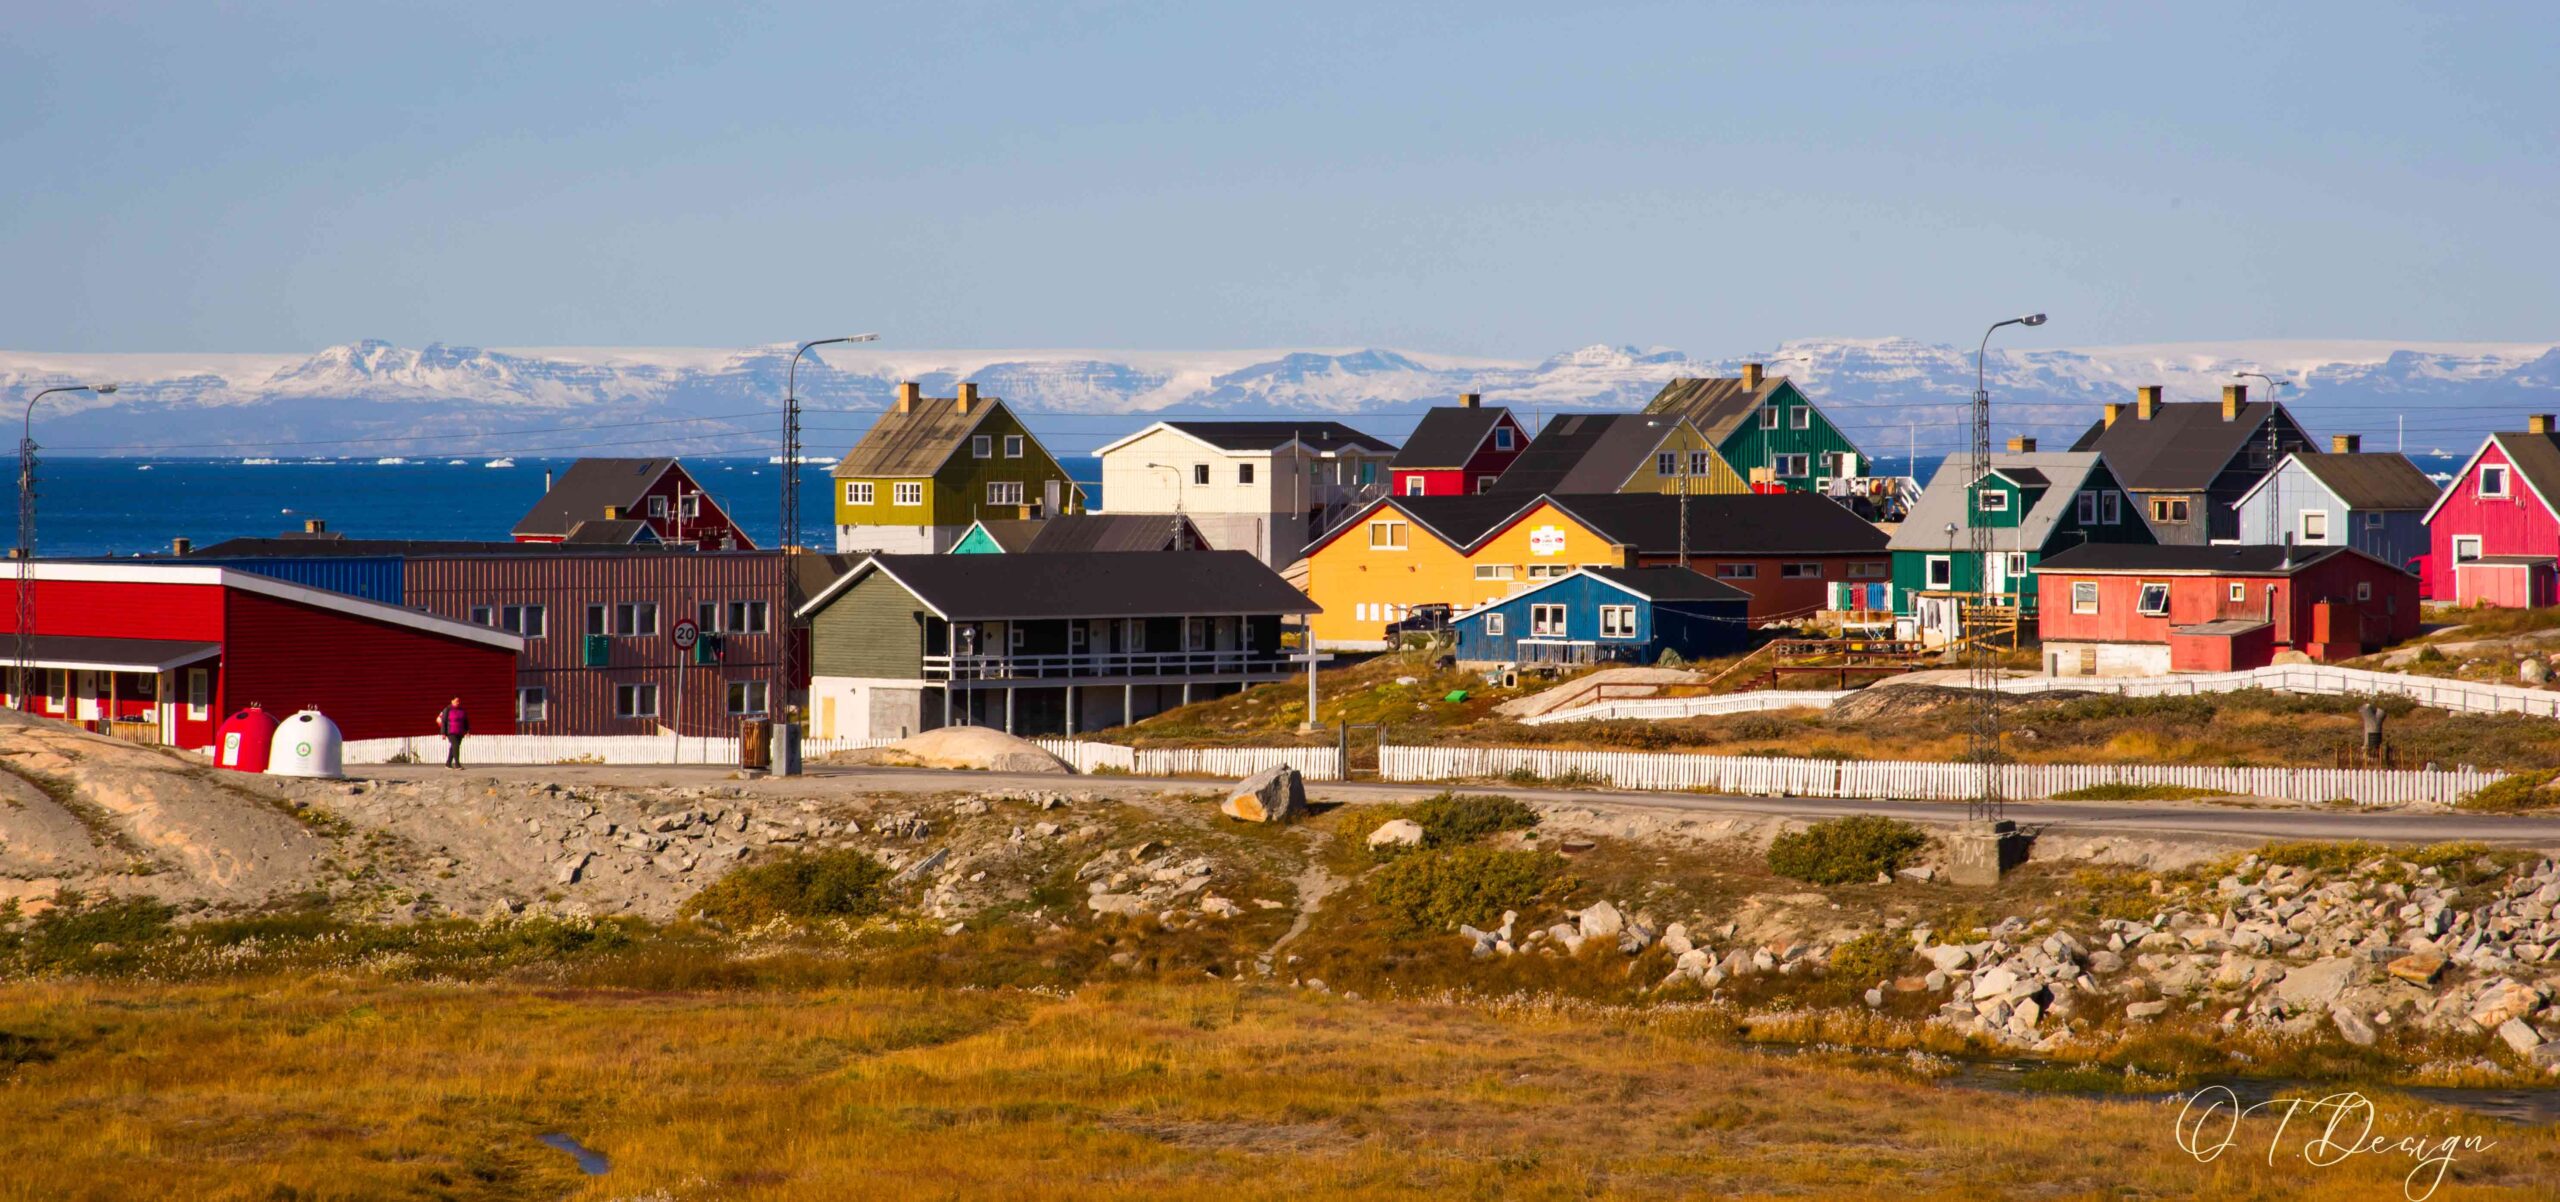 The colorful houses against the icy landscape in Ilulissat, Greenland